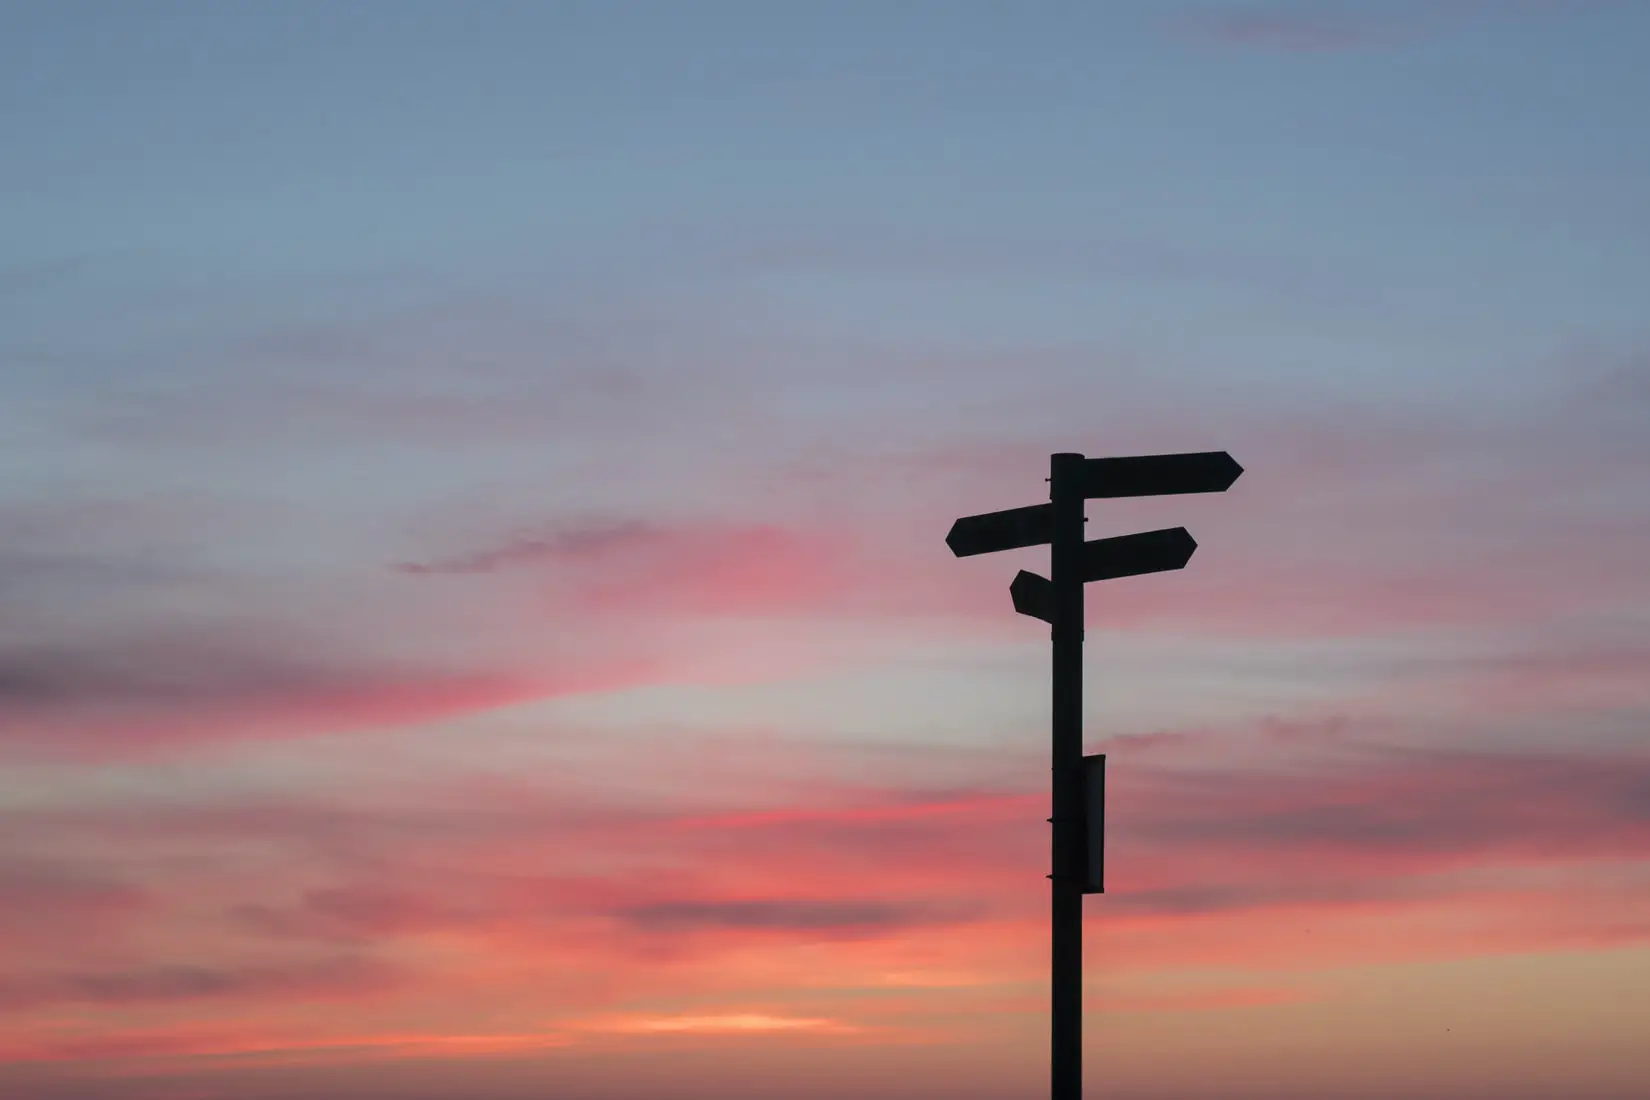 silhouette of sign posts with red sky in background